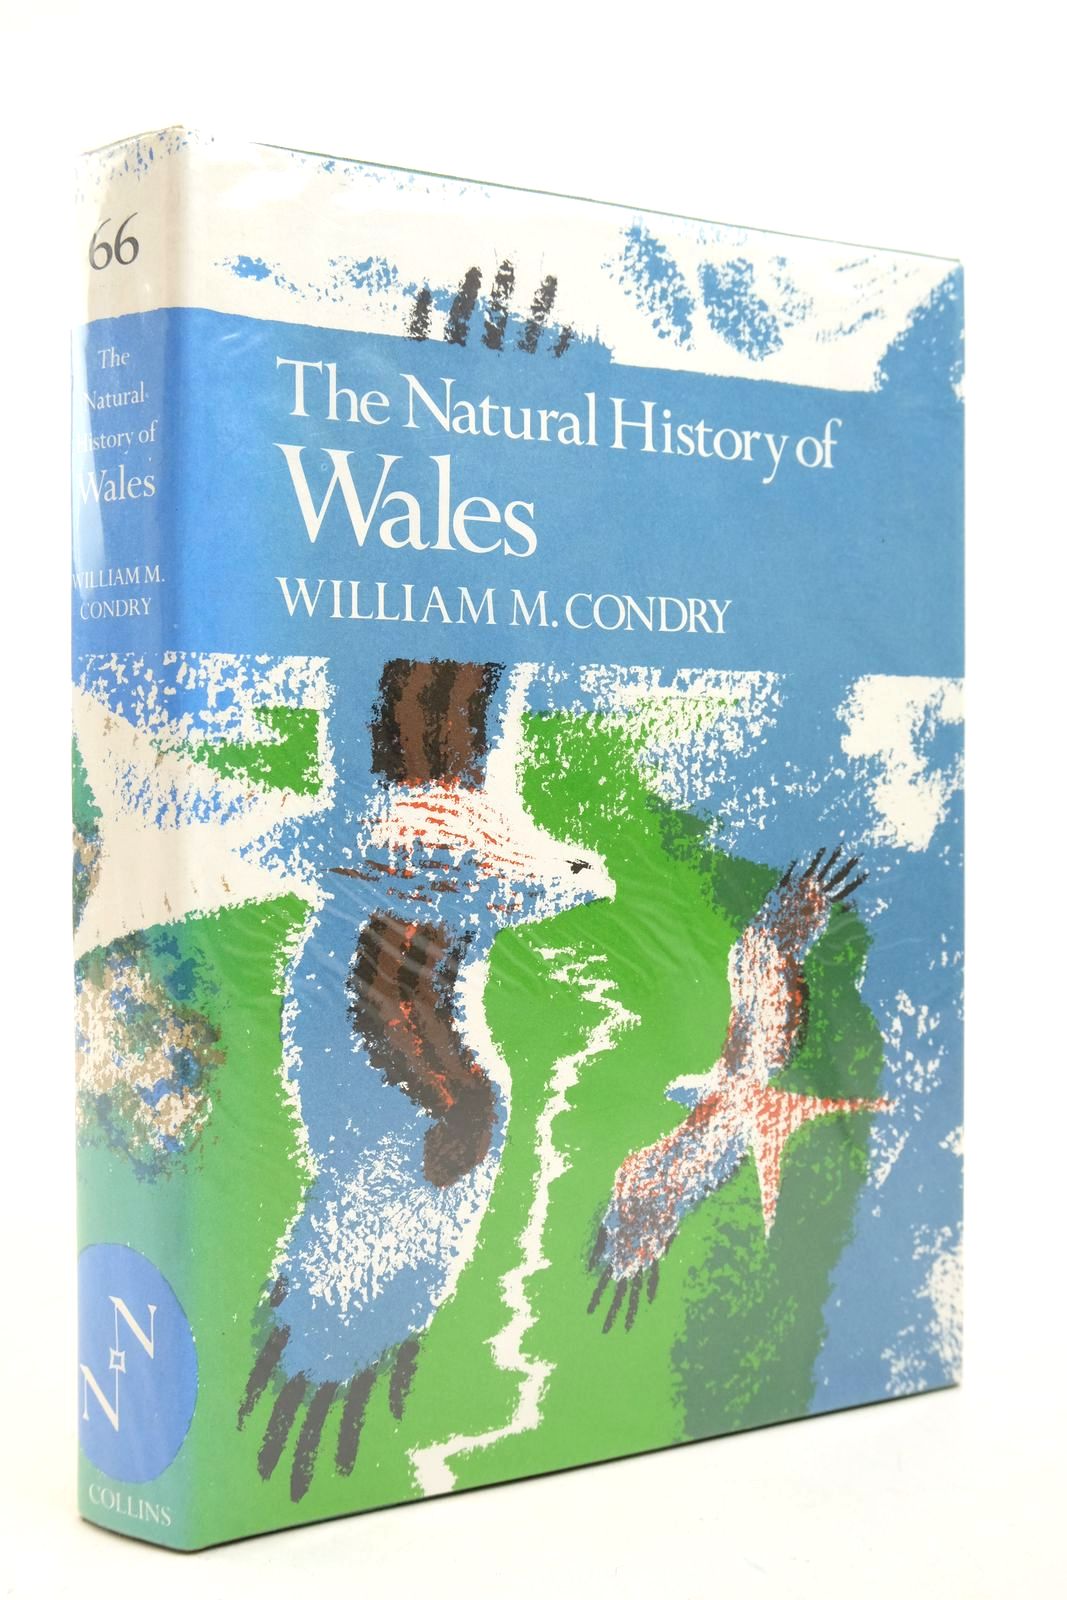 Photo of THE NATURAL HISTORY OF WALES (NN 66) written by Condry, William M. published by Collins (STOCK CODE: 2140714)  for sale by Stella & Rose's Books